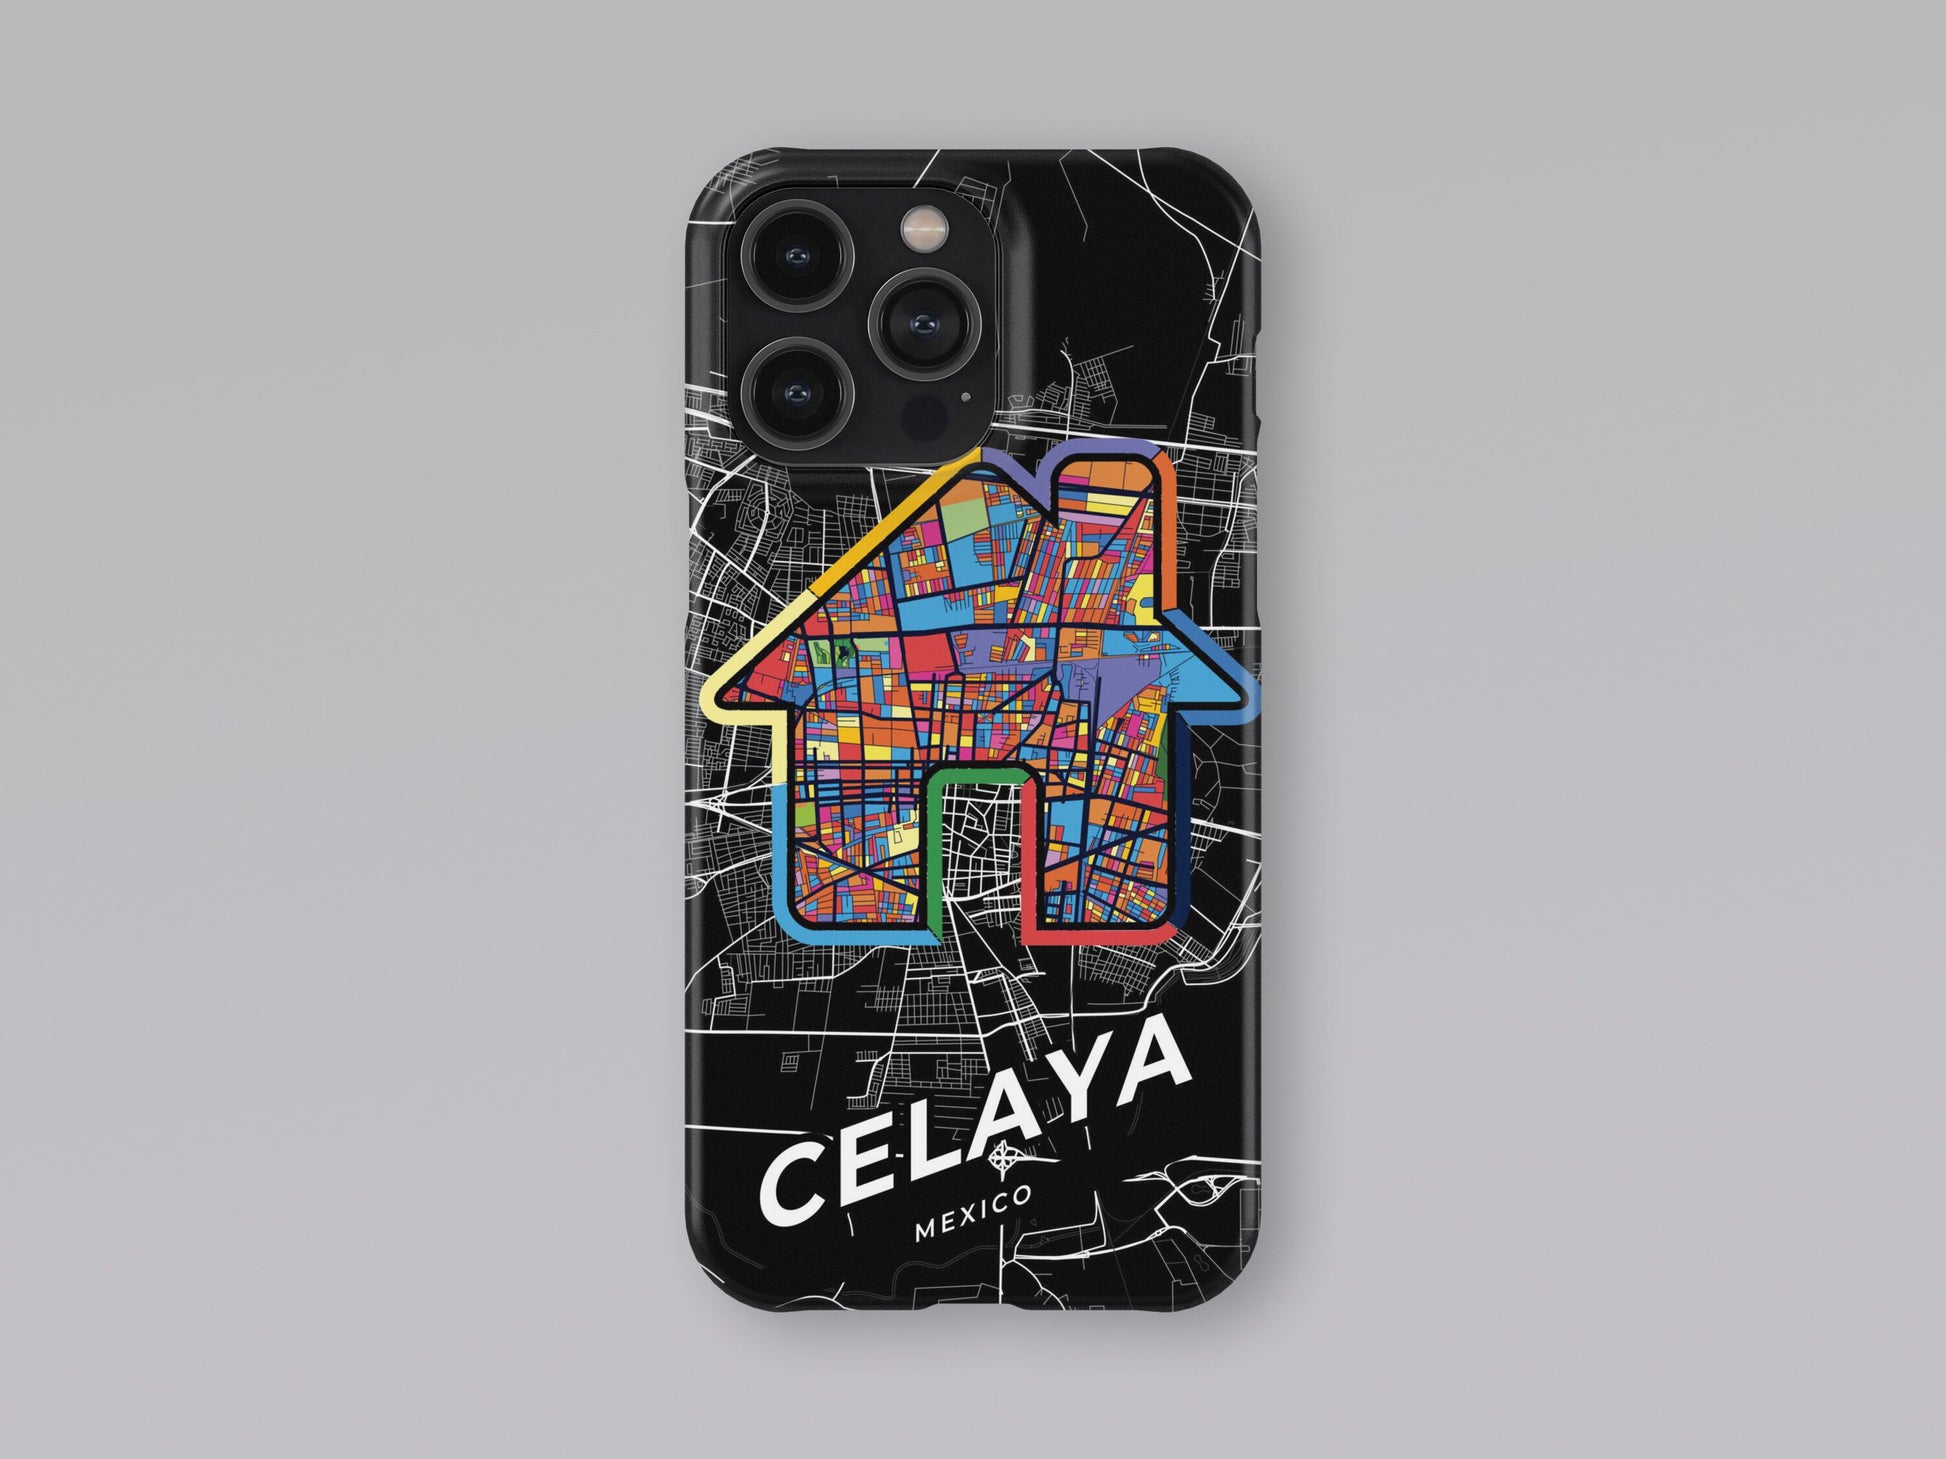 Celaya Mexico slim phone case with colorful icon. Birthday, wedding or housewarming gift. Couple match cases. 3